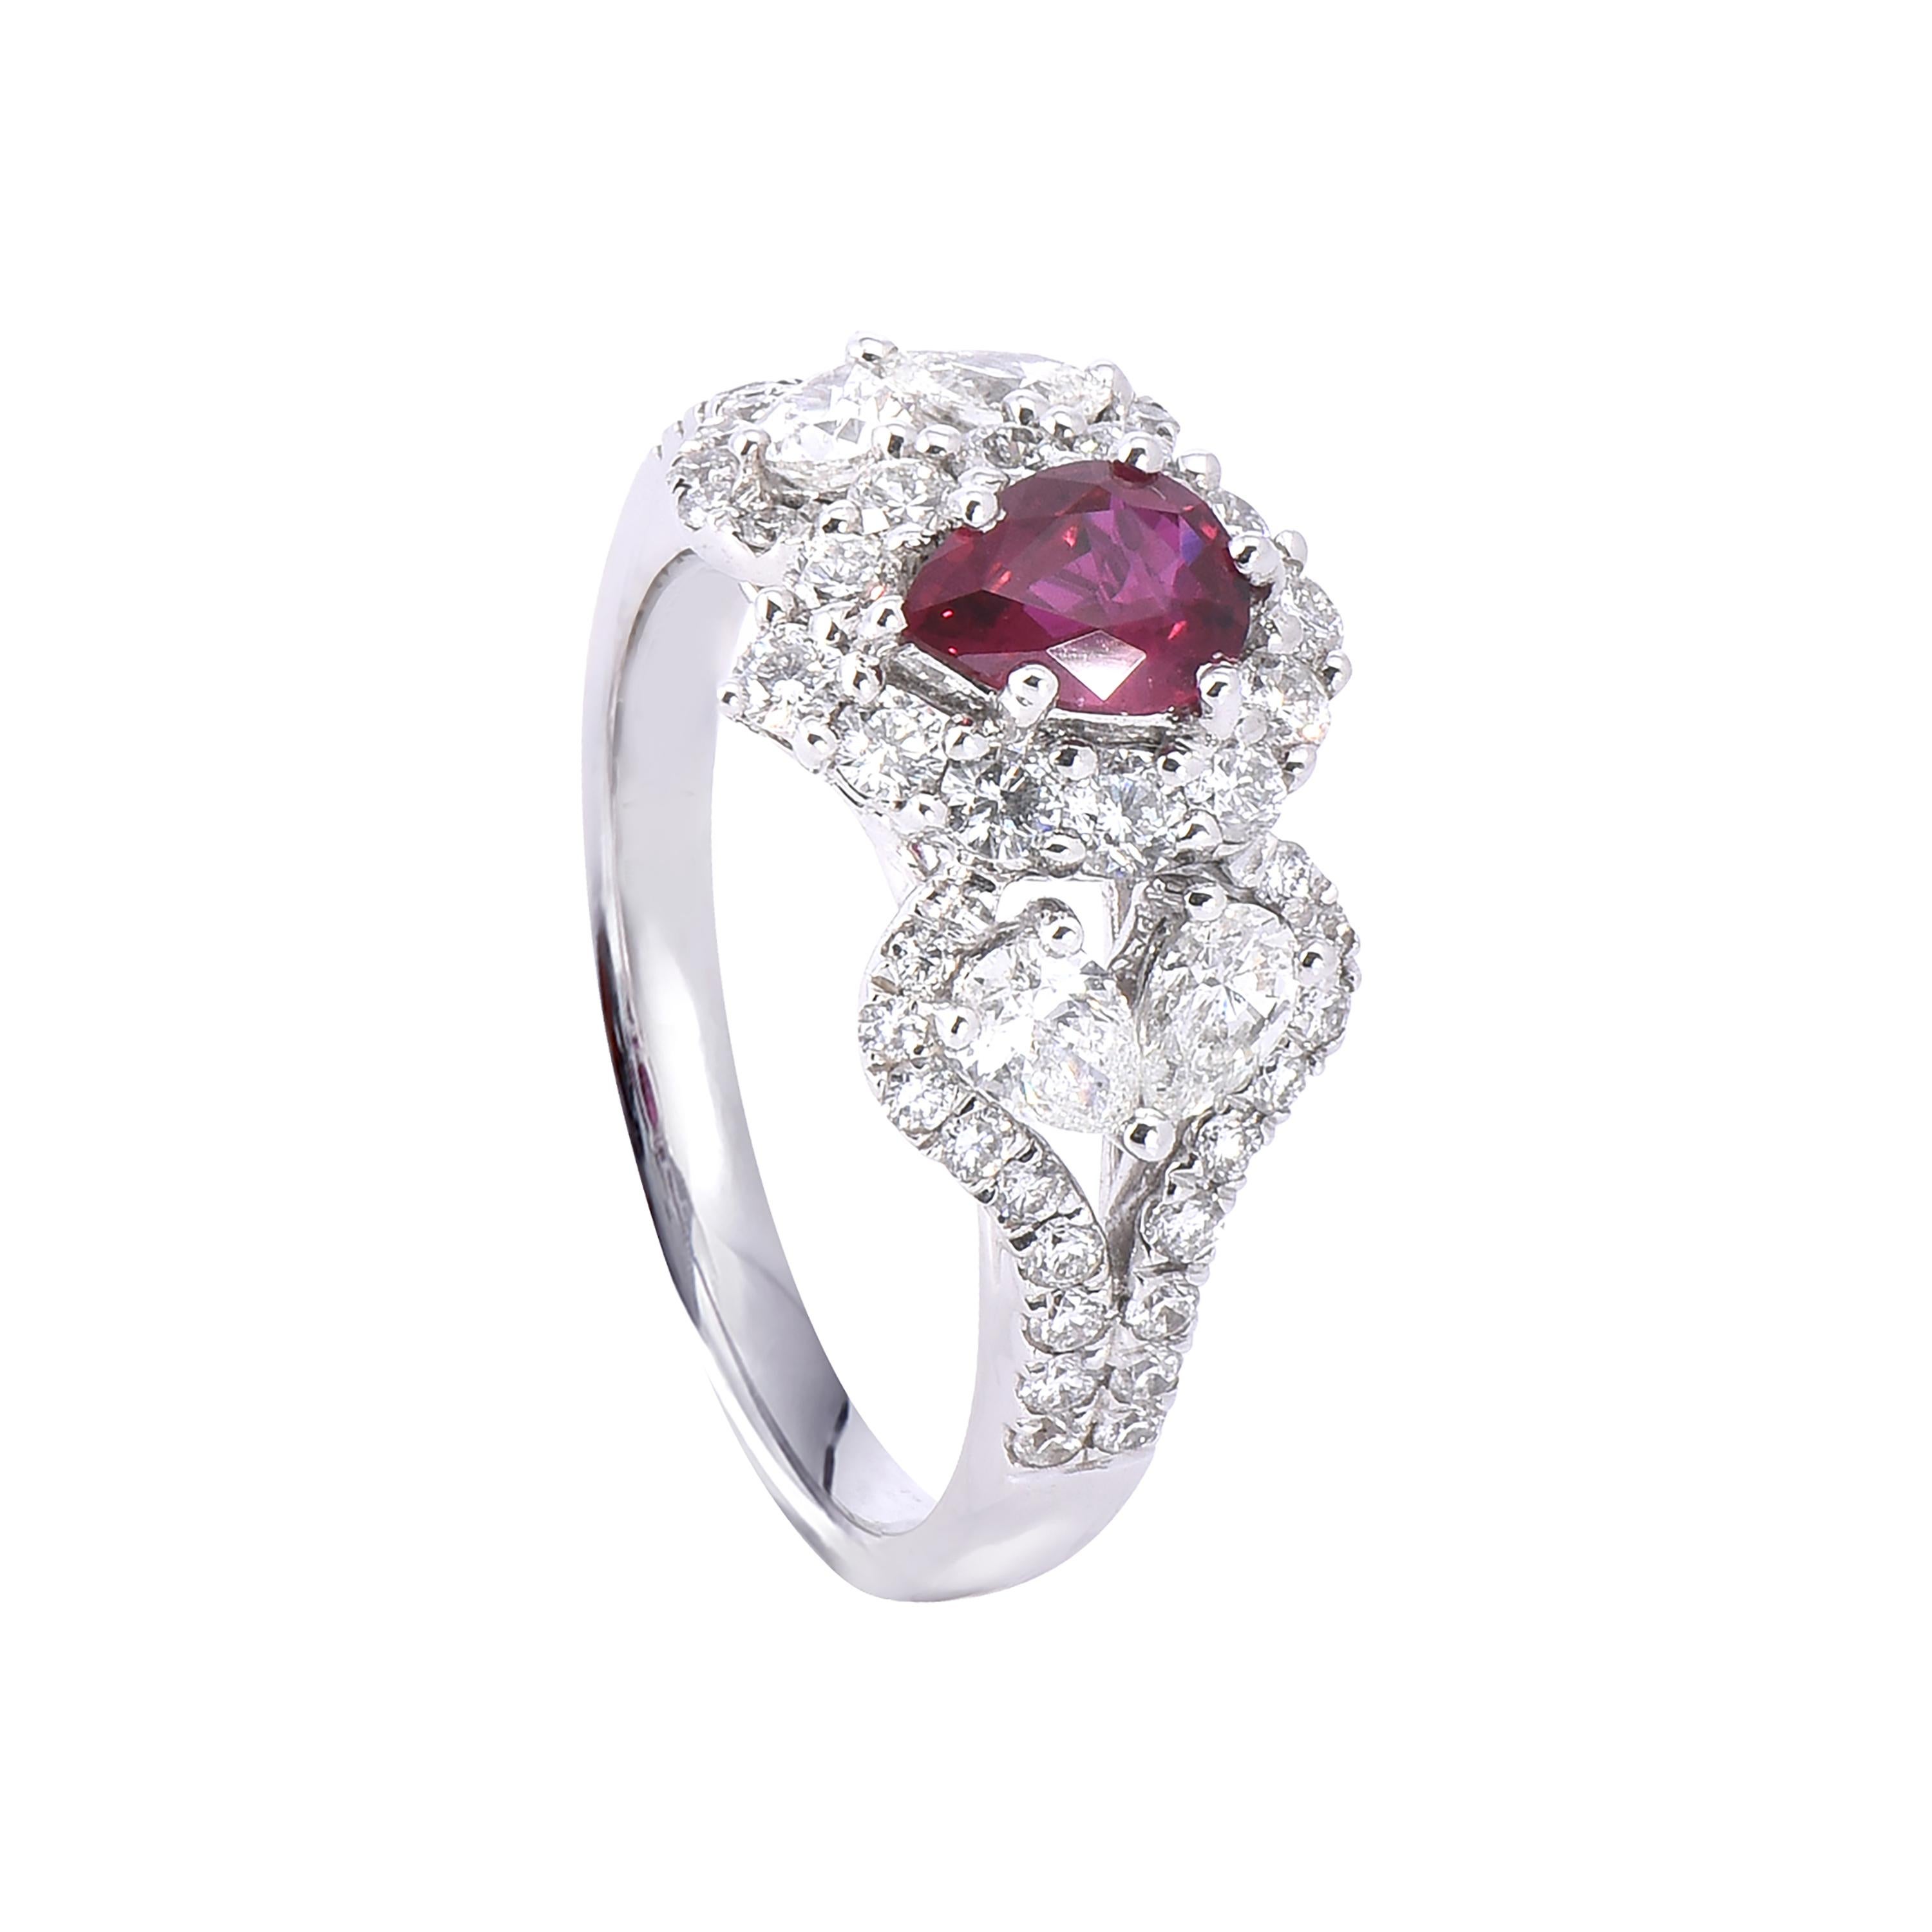 18 karat white gold ruby ring from the Venetian collection of Laviere. The ring, certified by IGI, is set with a 0.63 carats pear shape ruby, 0.75 carats round brilliant diamonds and pear shape brilliant diamonds totaling 0.49 carat.
Gold Weight